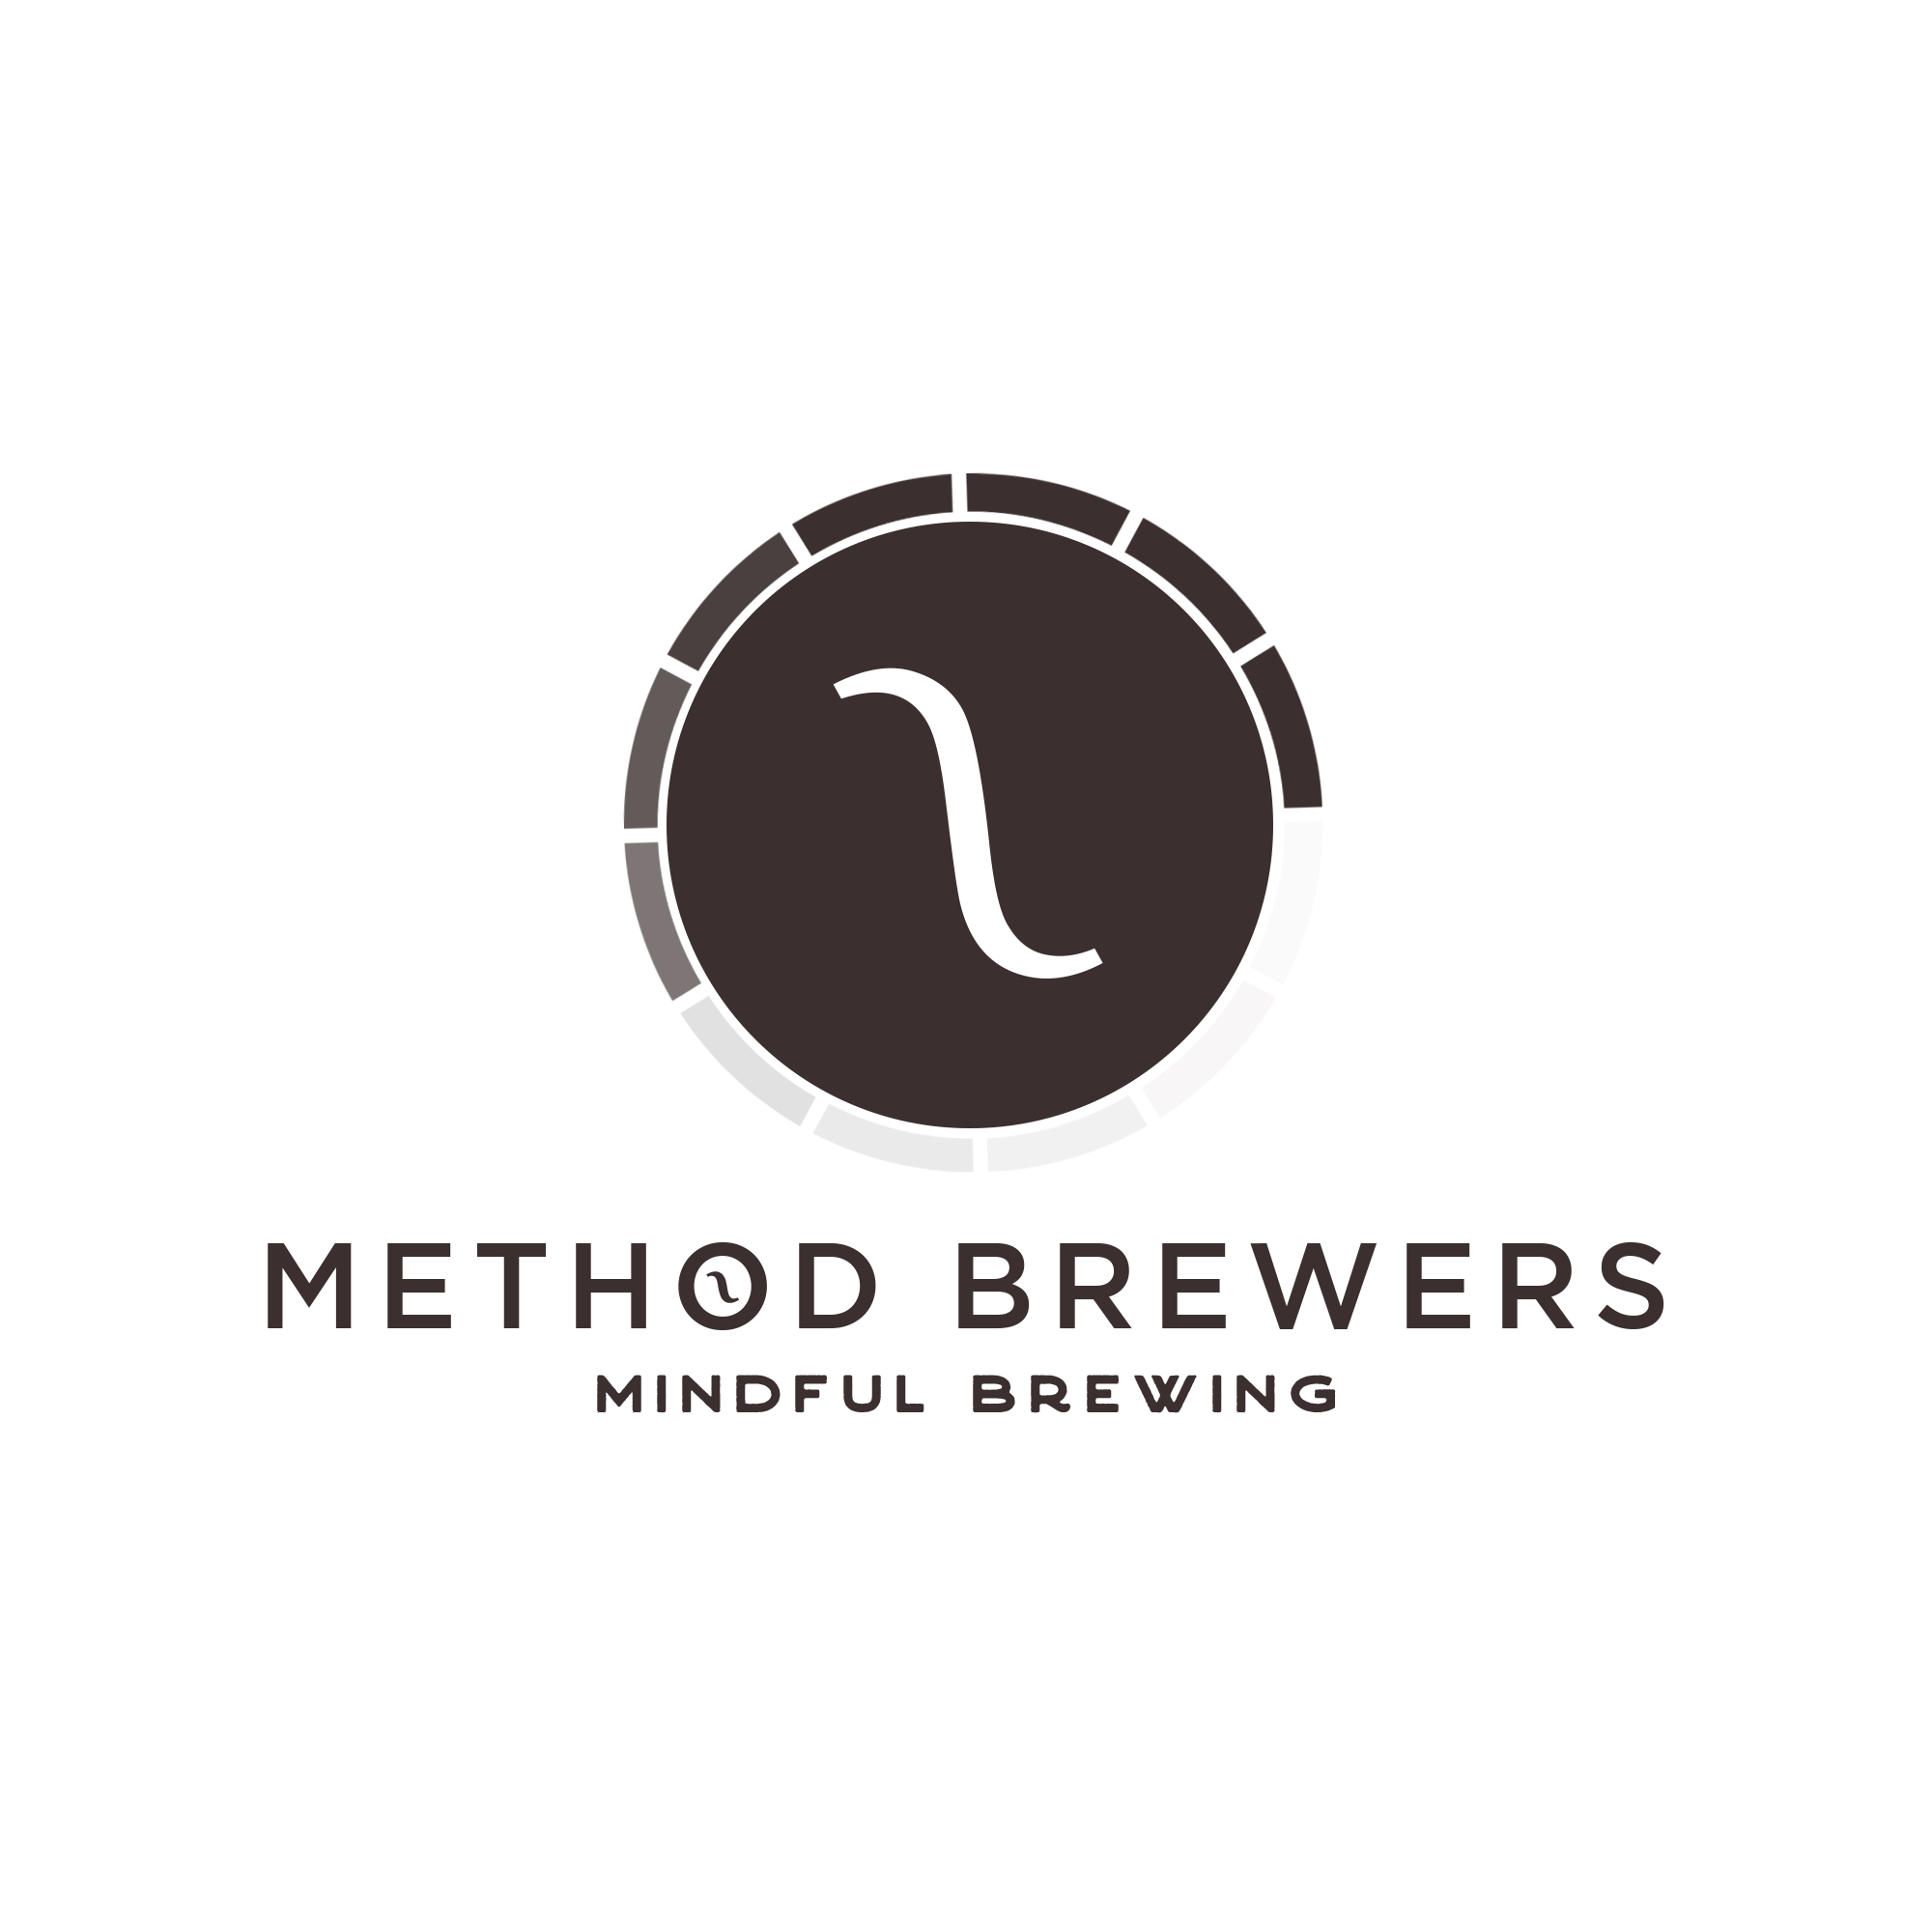 Shop online with Method Brewers now! Visit Method Brewers on Lazada.